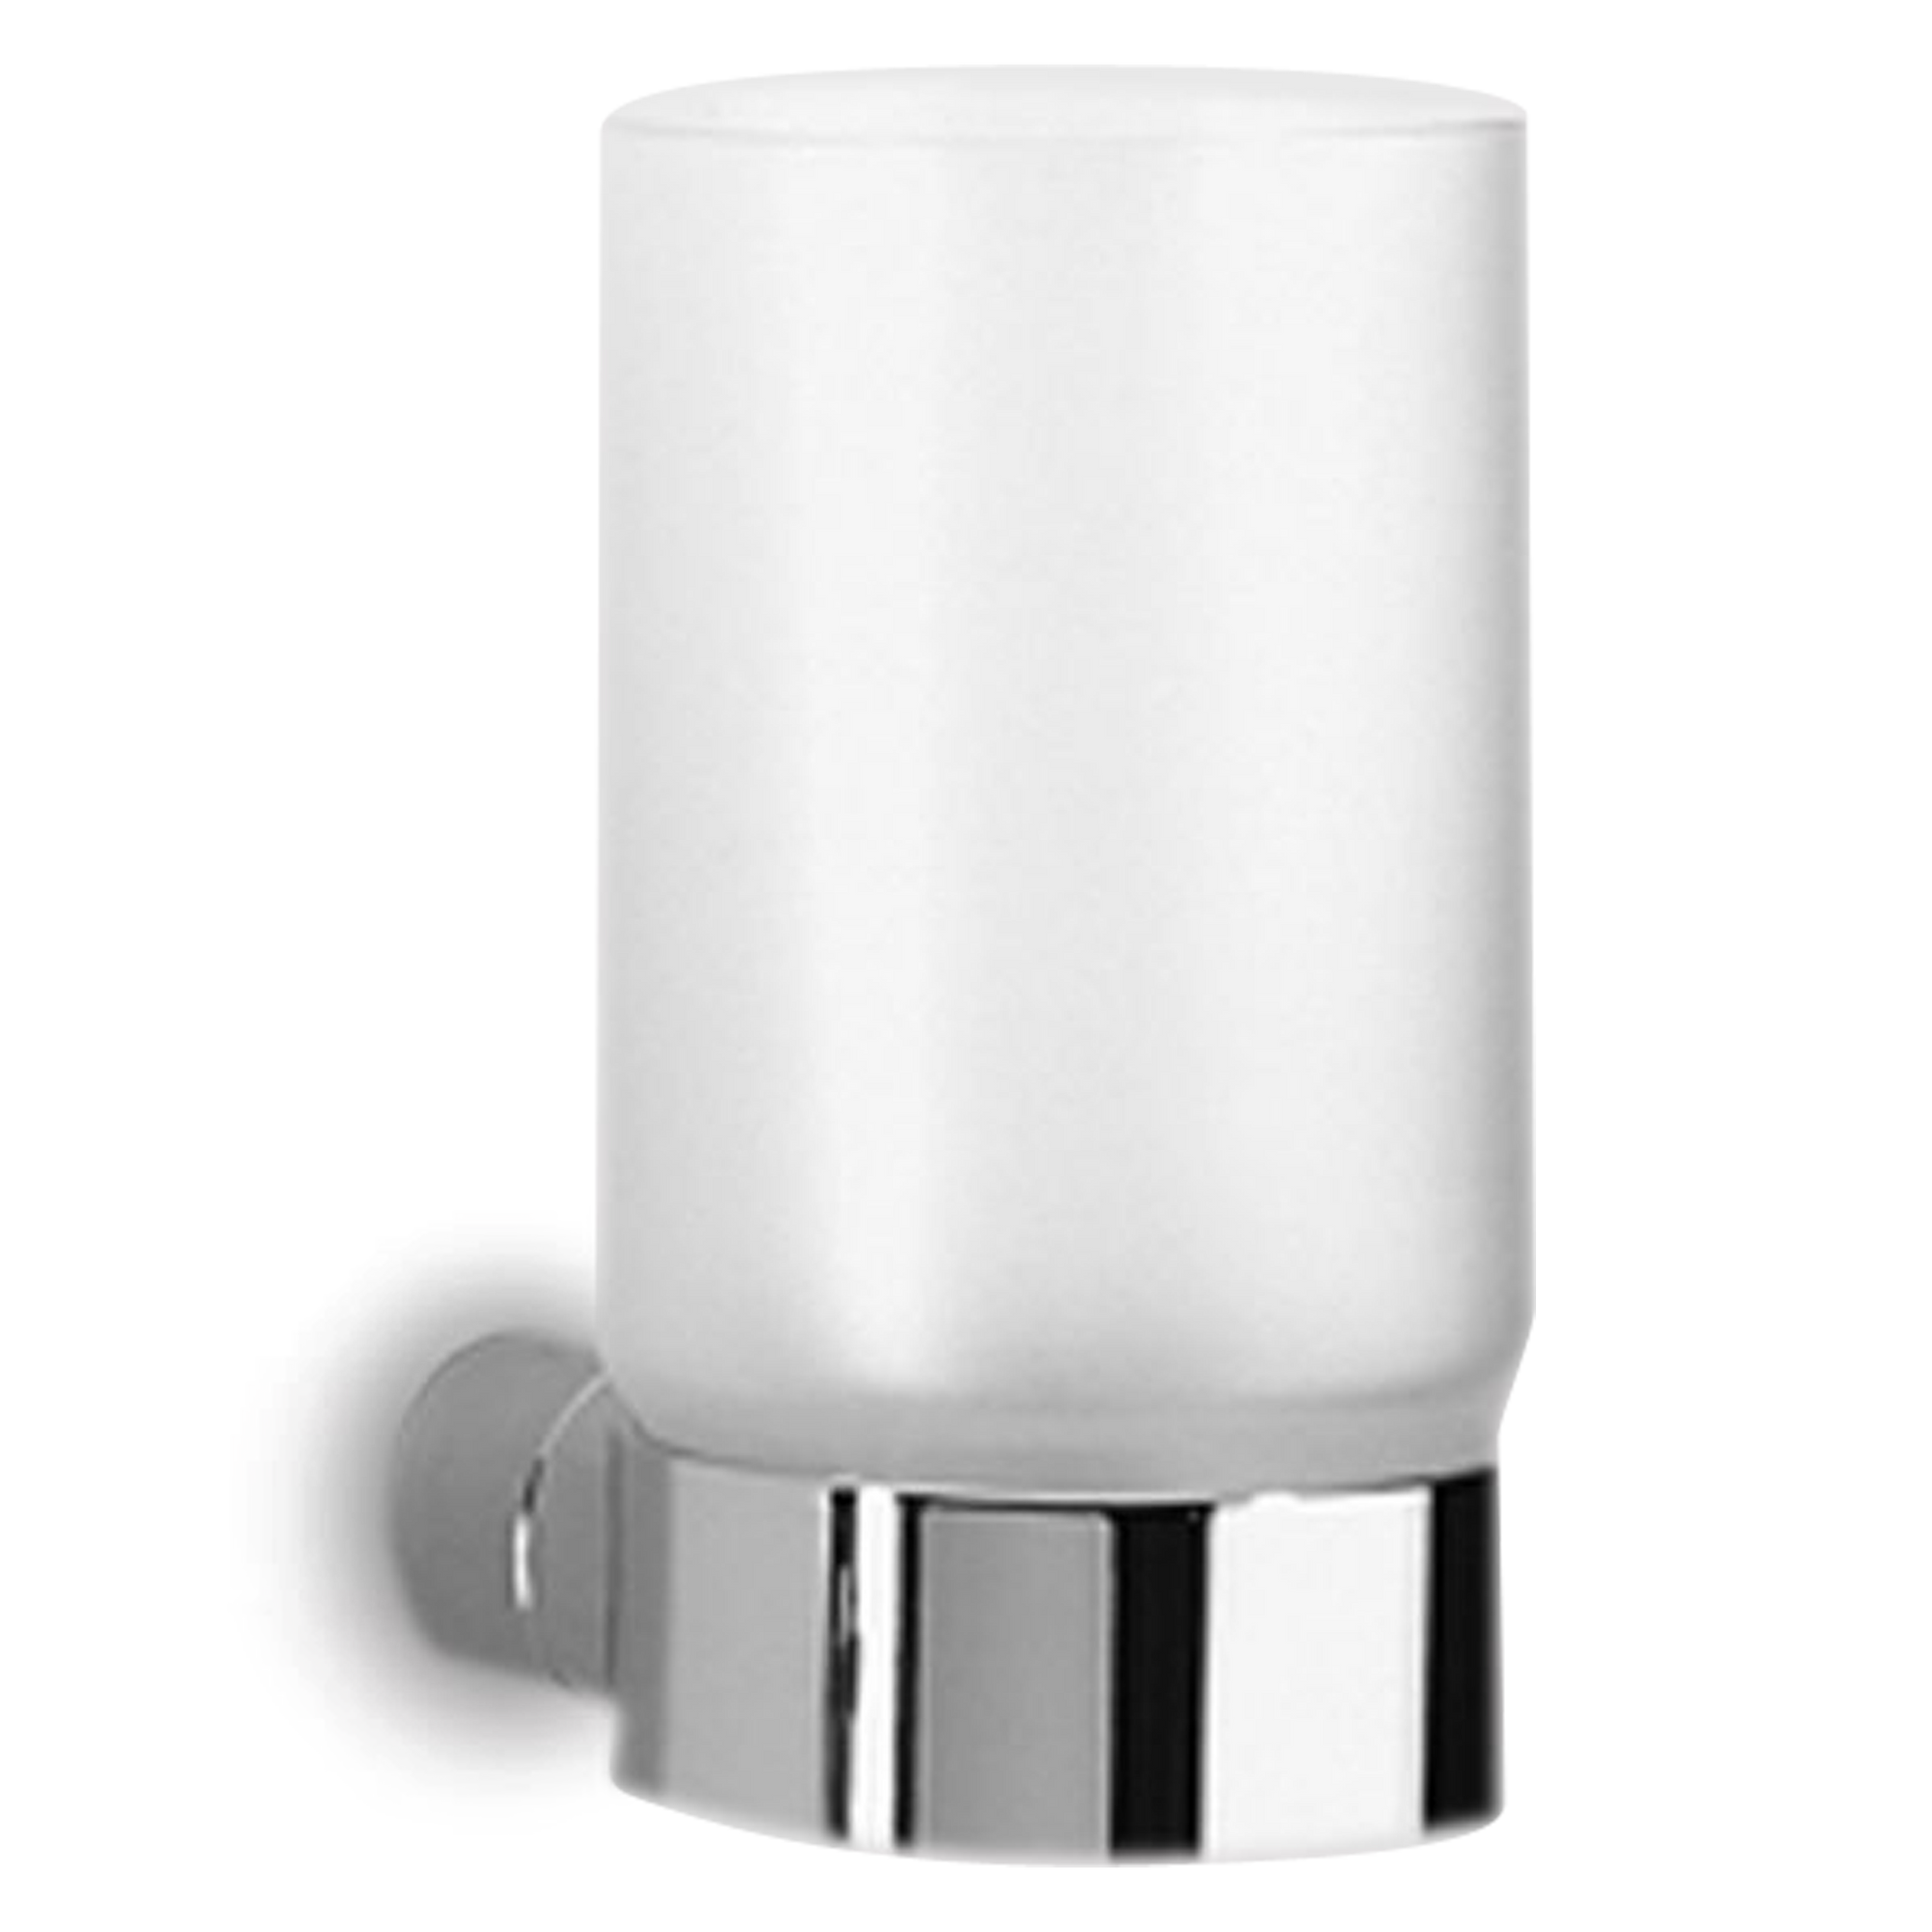 Minimalist and modern, the functional Xenon Tumbler features a frosted glass tumbler with a brushed nickel base.